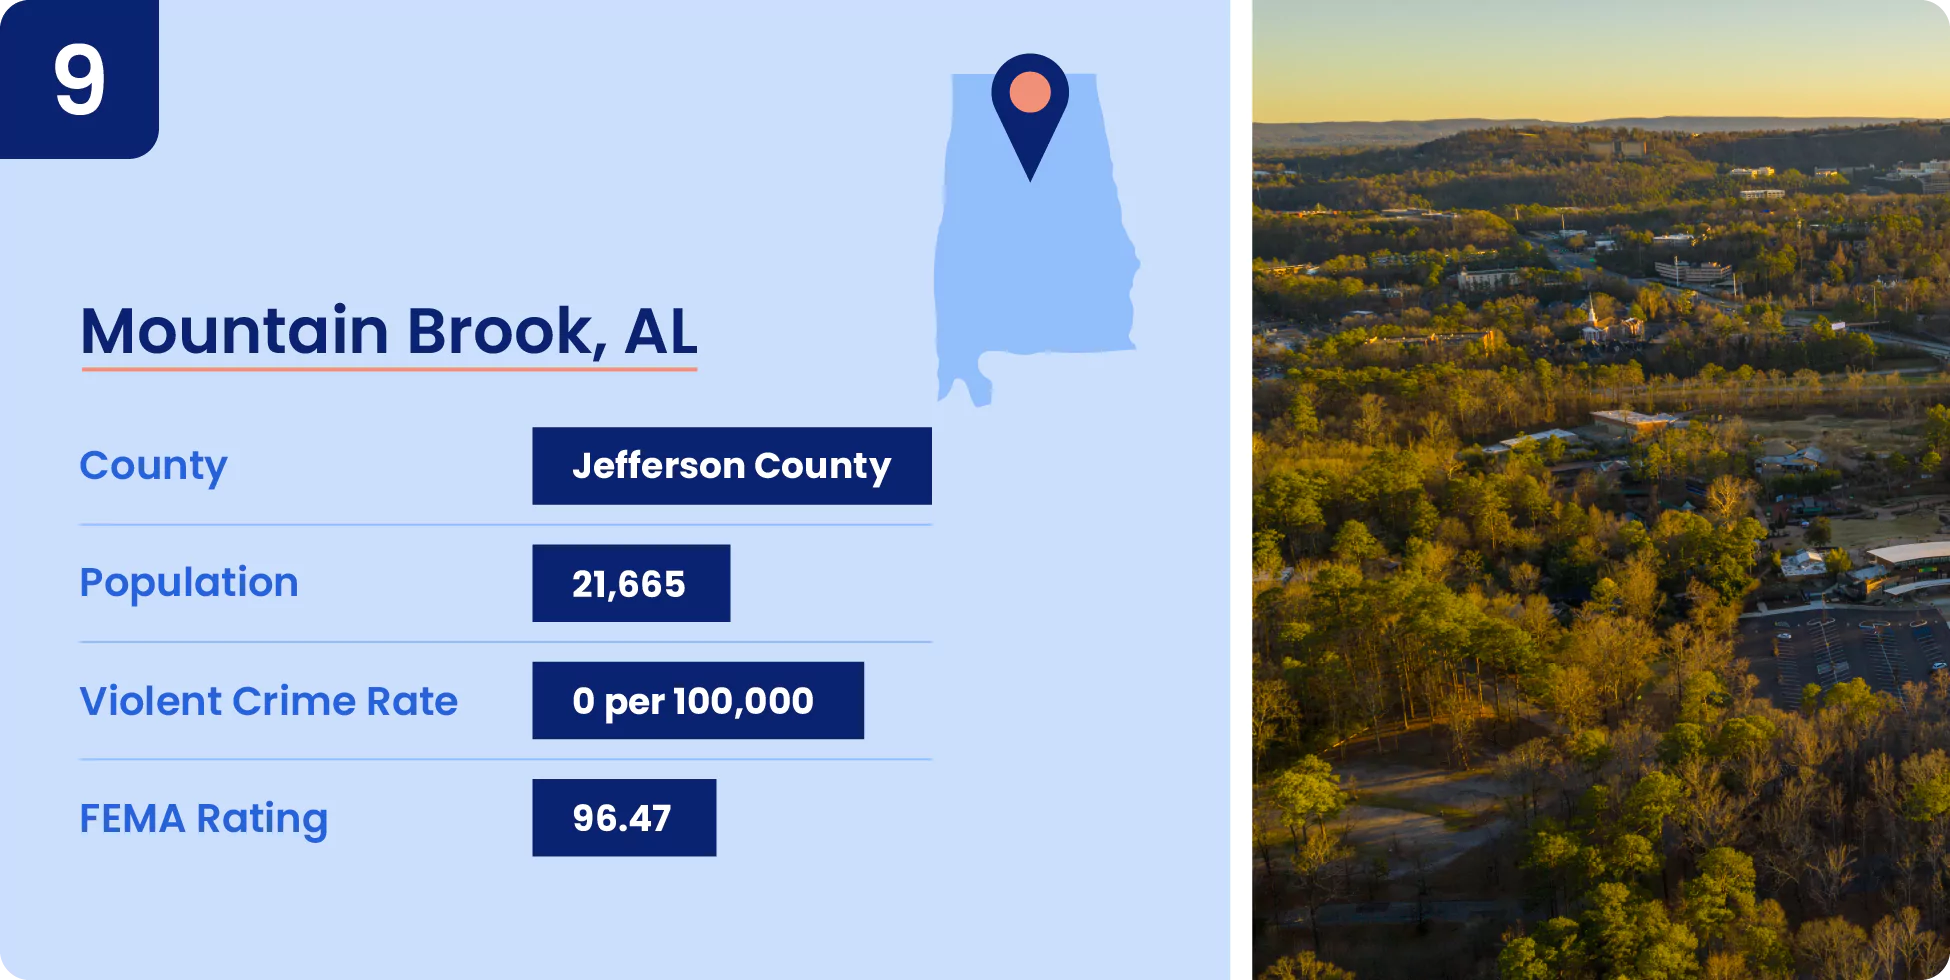 Image shows key information for one of the safest cities in Alabama, Mountain Brook.